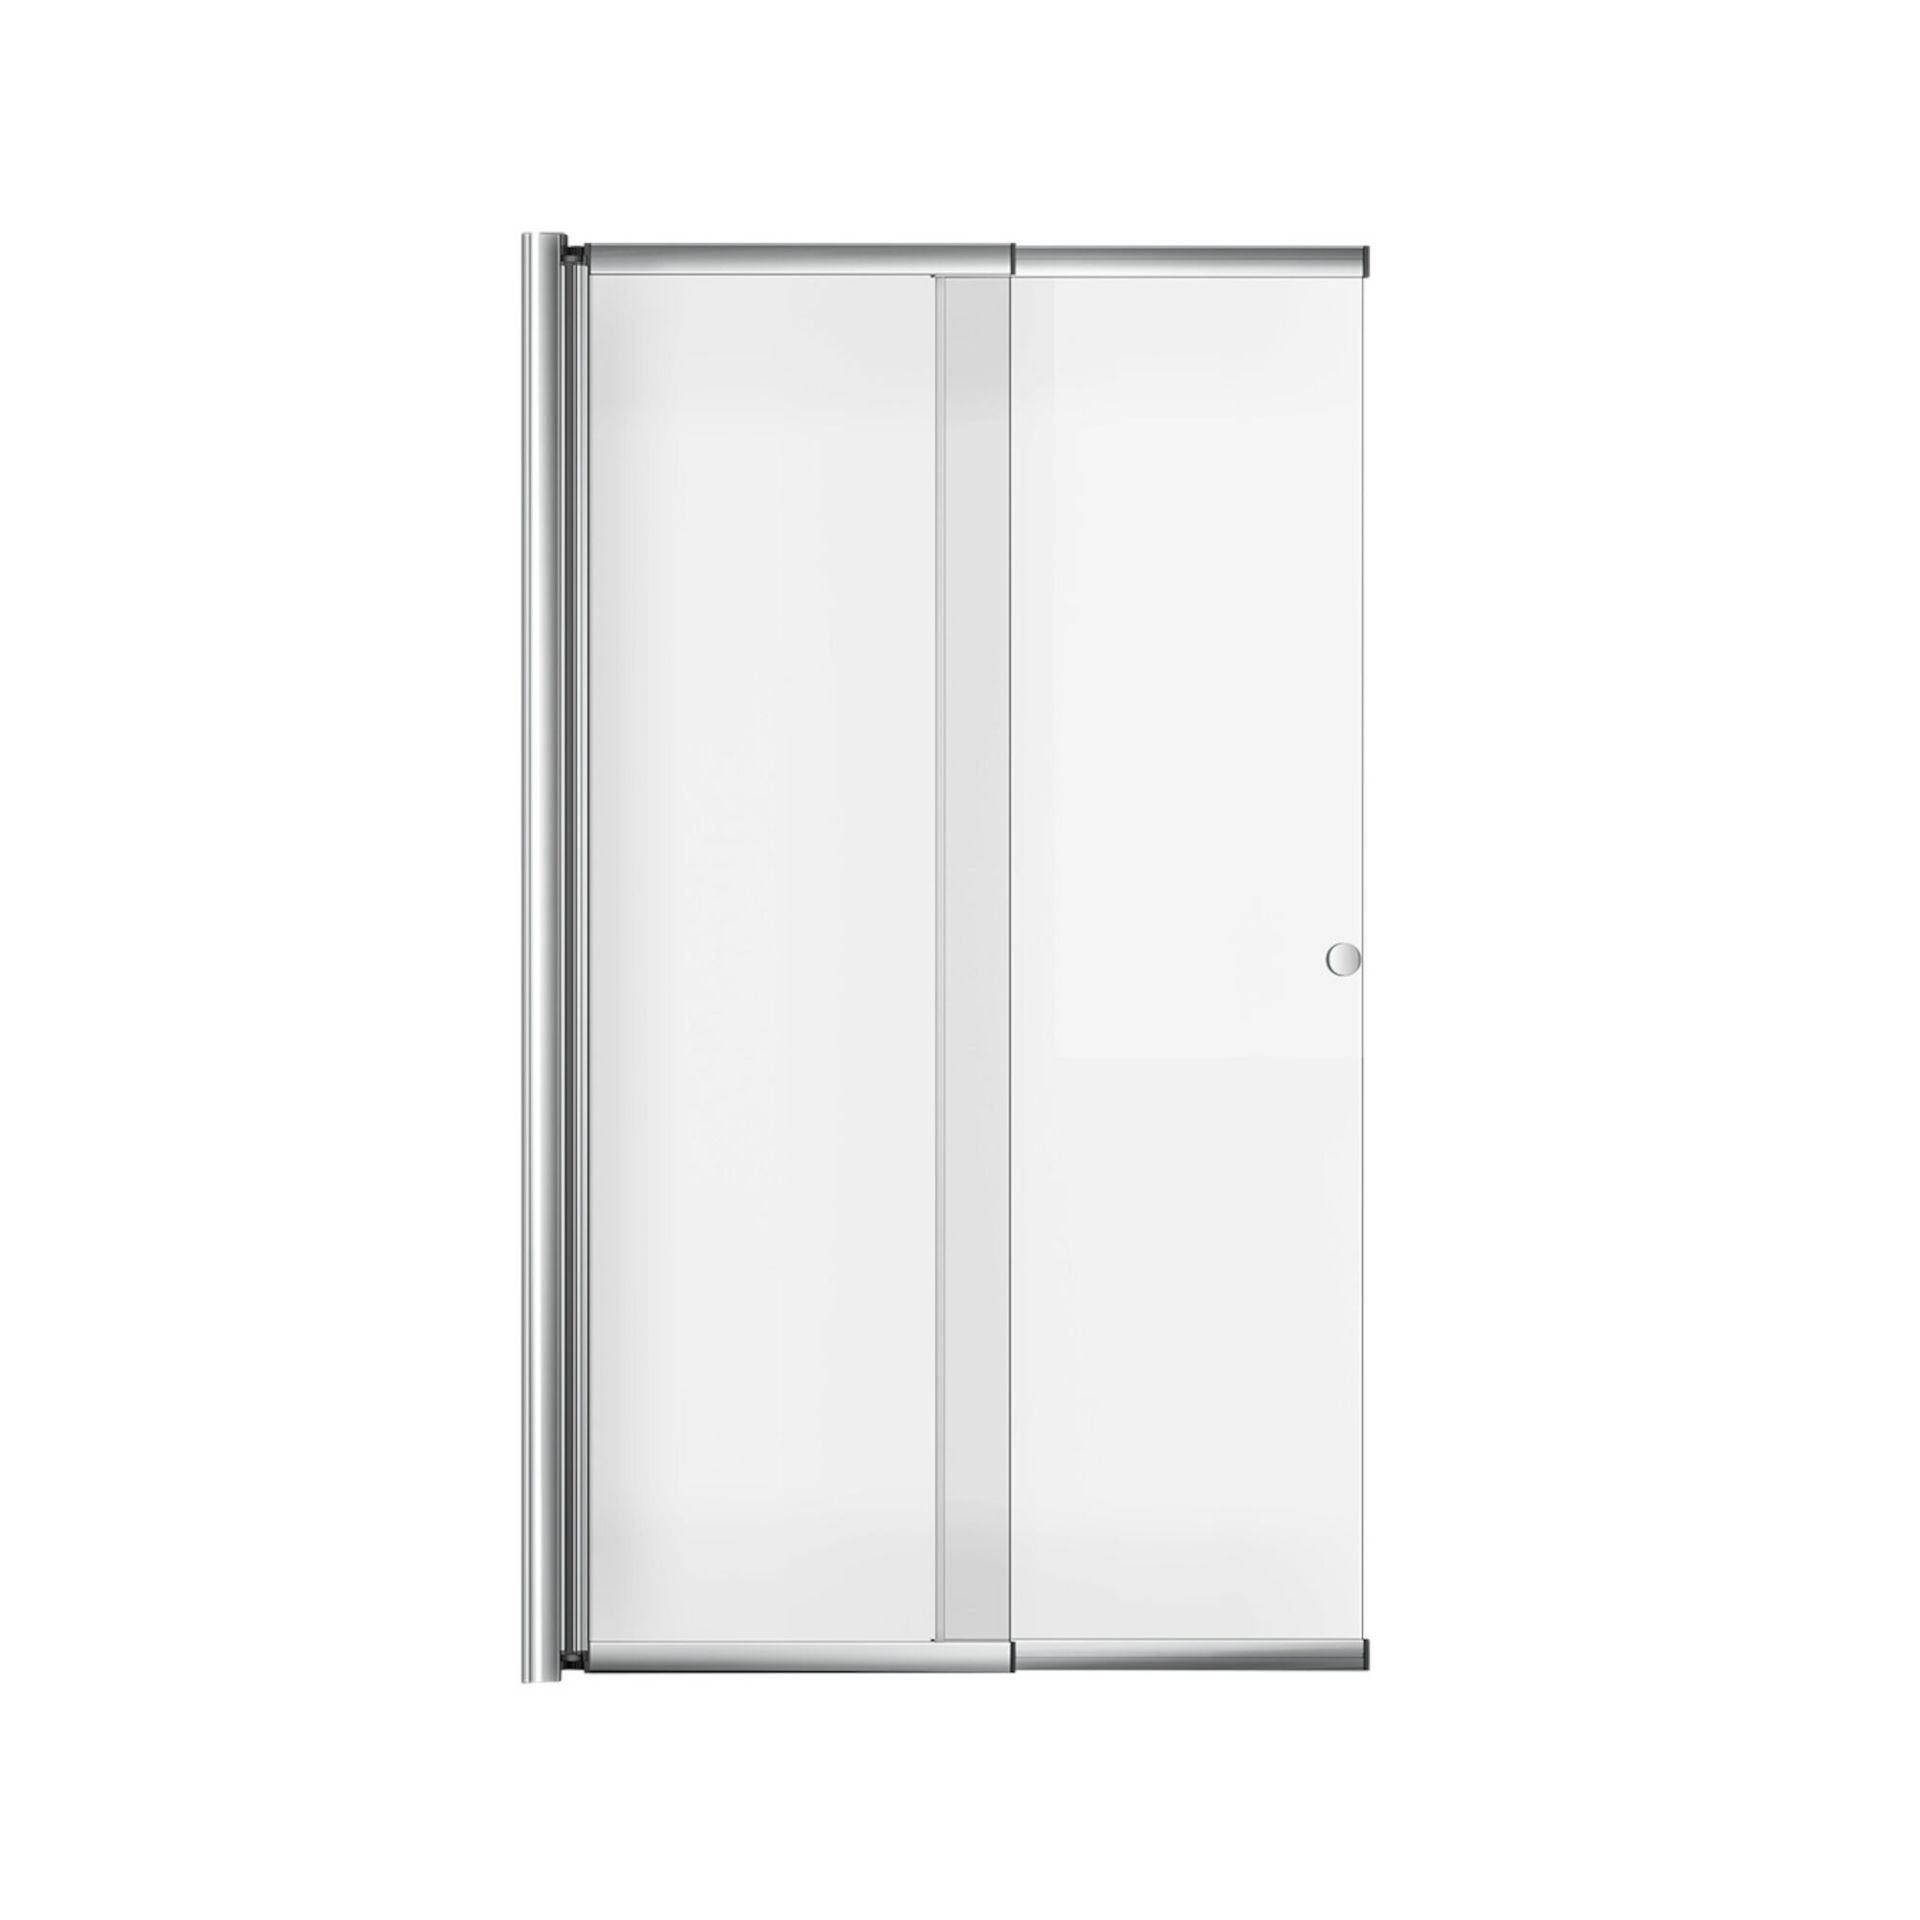 (MC202) 820mm Sliding Bath Screen. RRP £189.00. Constructed of 4mm lightweight tempered safety glass - Image 2 of 2